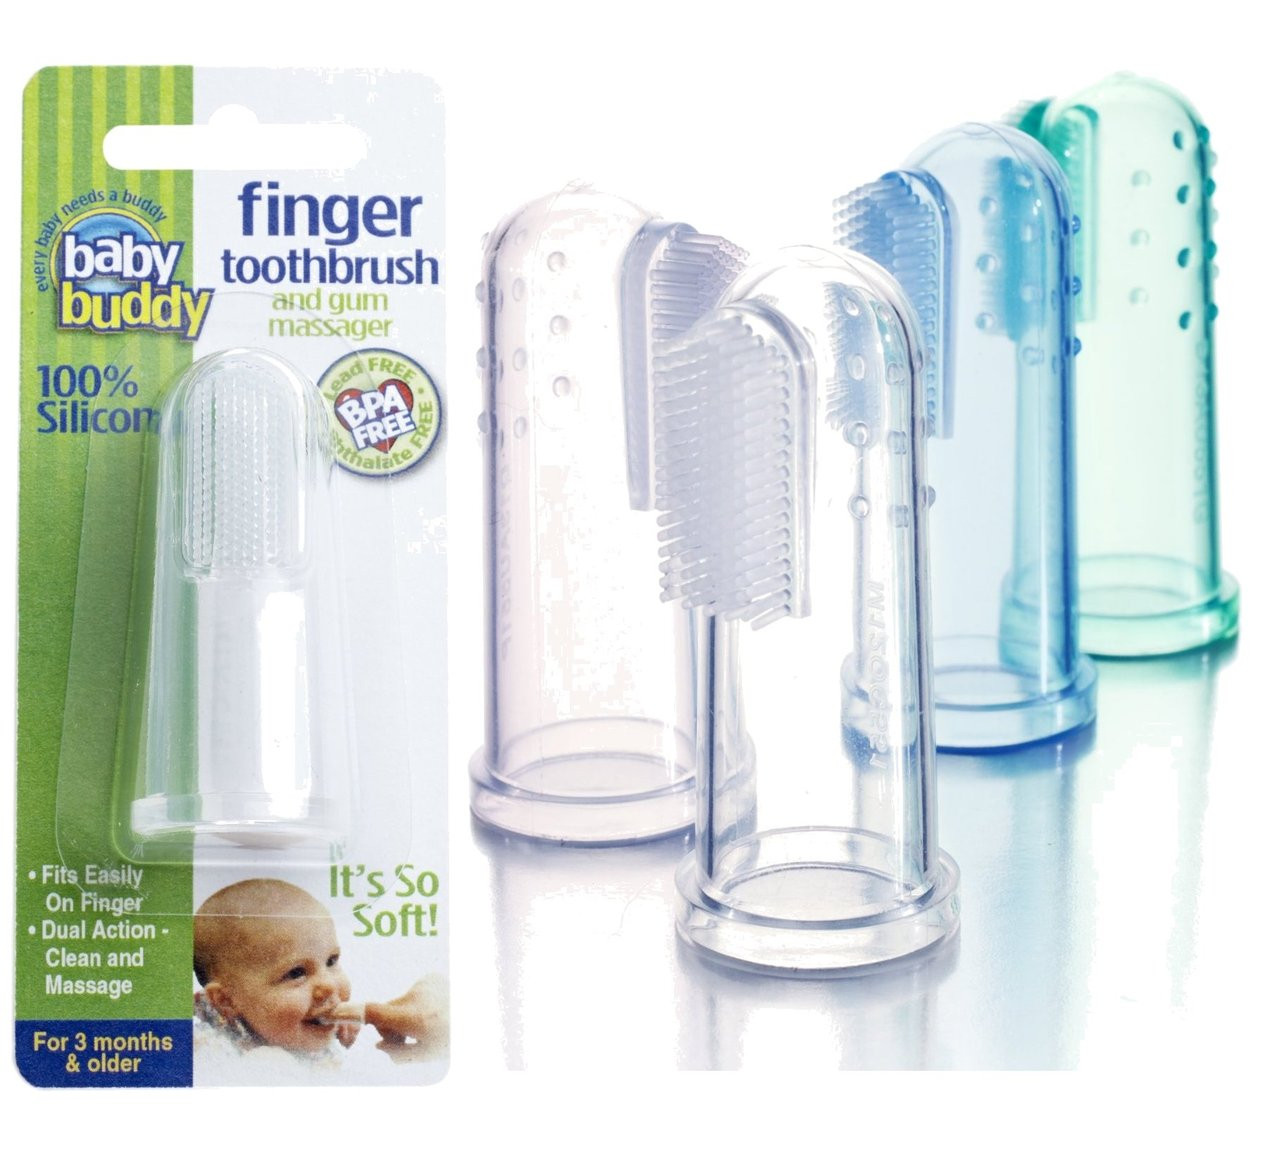 finger toothbrush for adults